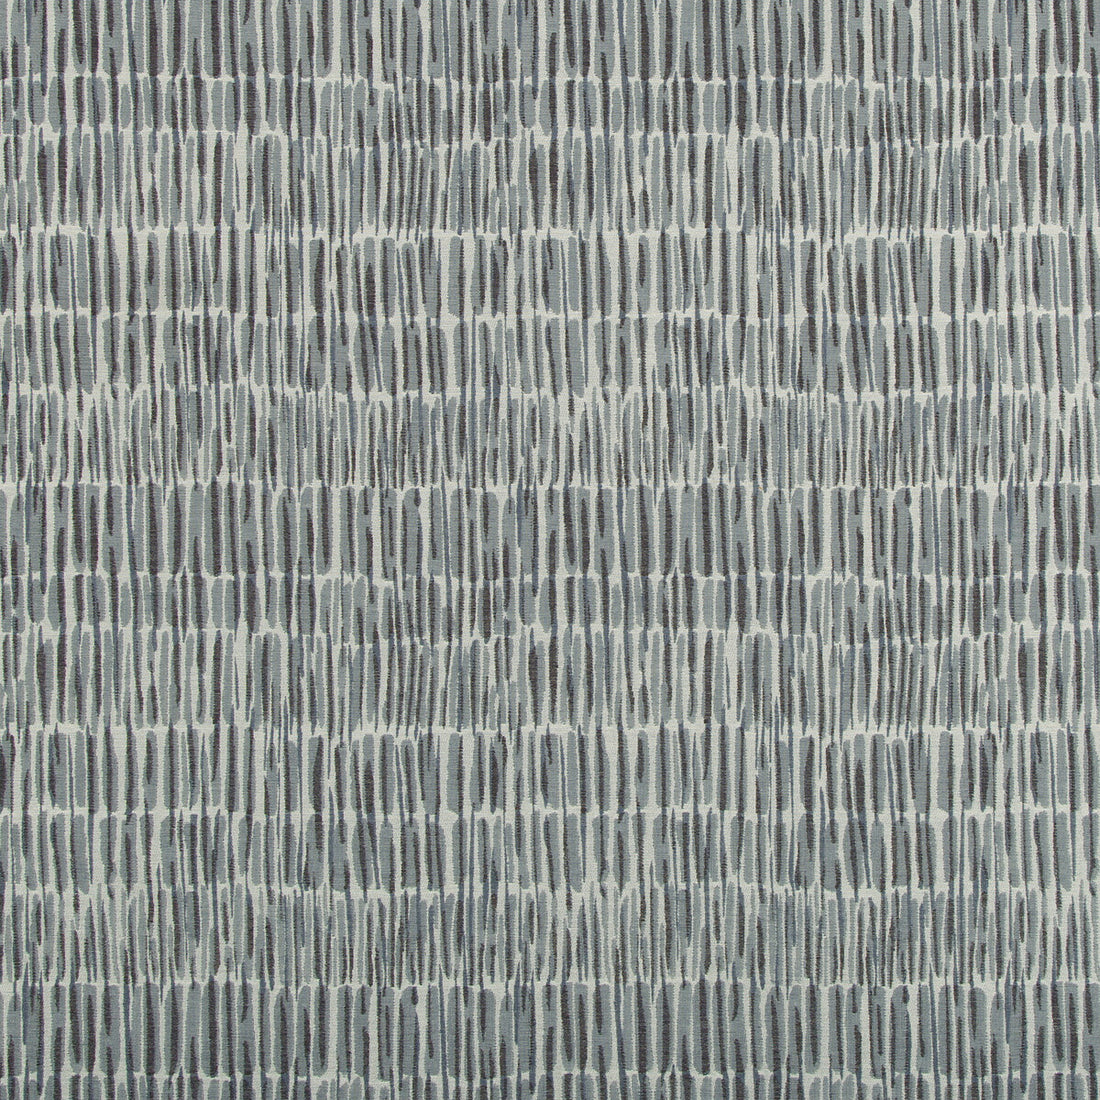 Perforation fabric in chambray color - pattern 35398.15.0 - by Kravet Design in the Nate Berkus Well-Traveled collection